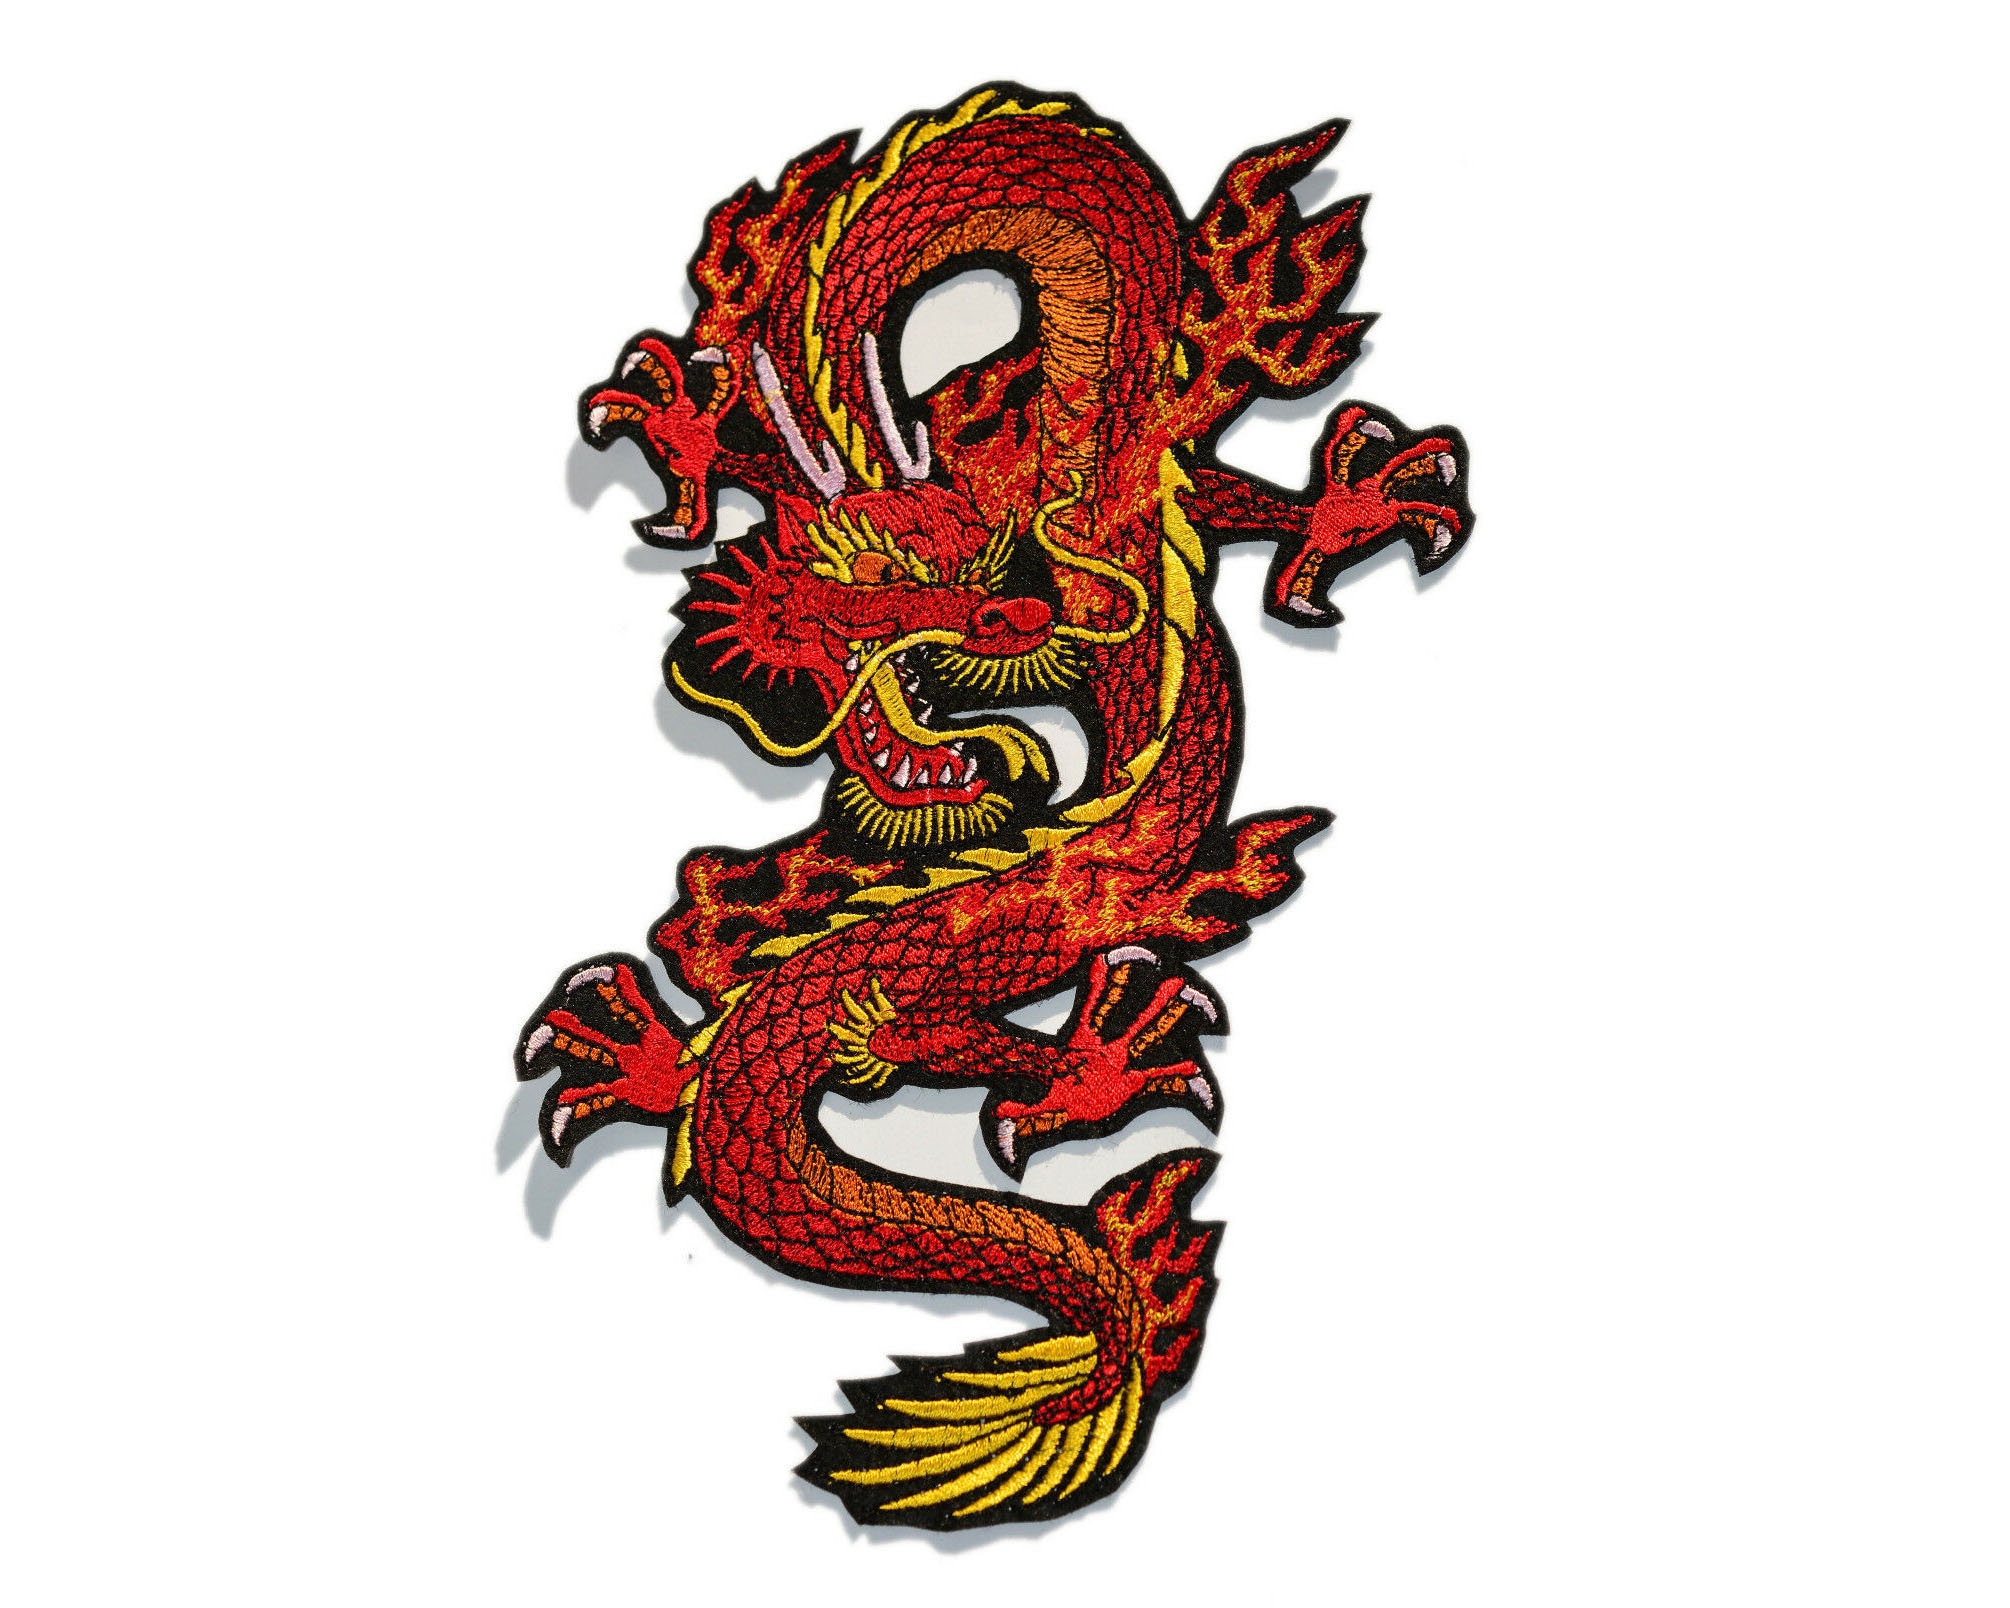 Dragon Large Iron On Patch Embroidered 13.4'' Dragon Fabric Applique Patch  Black Red Sew on Patches DIY Costume, Jeans, Jackets, Clothing, Bags